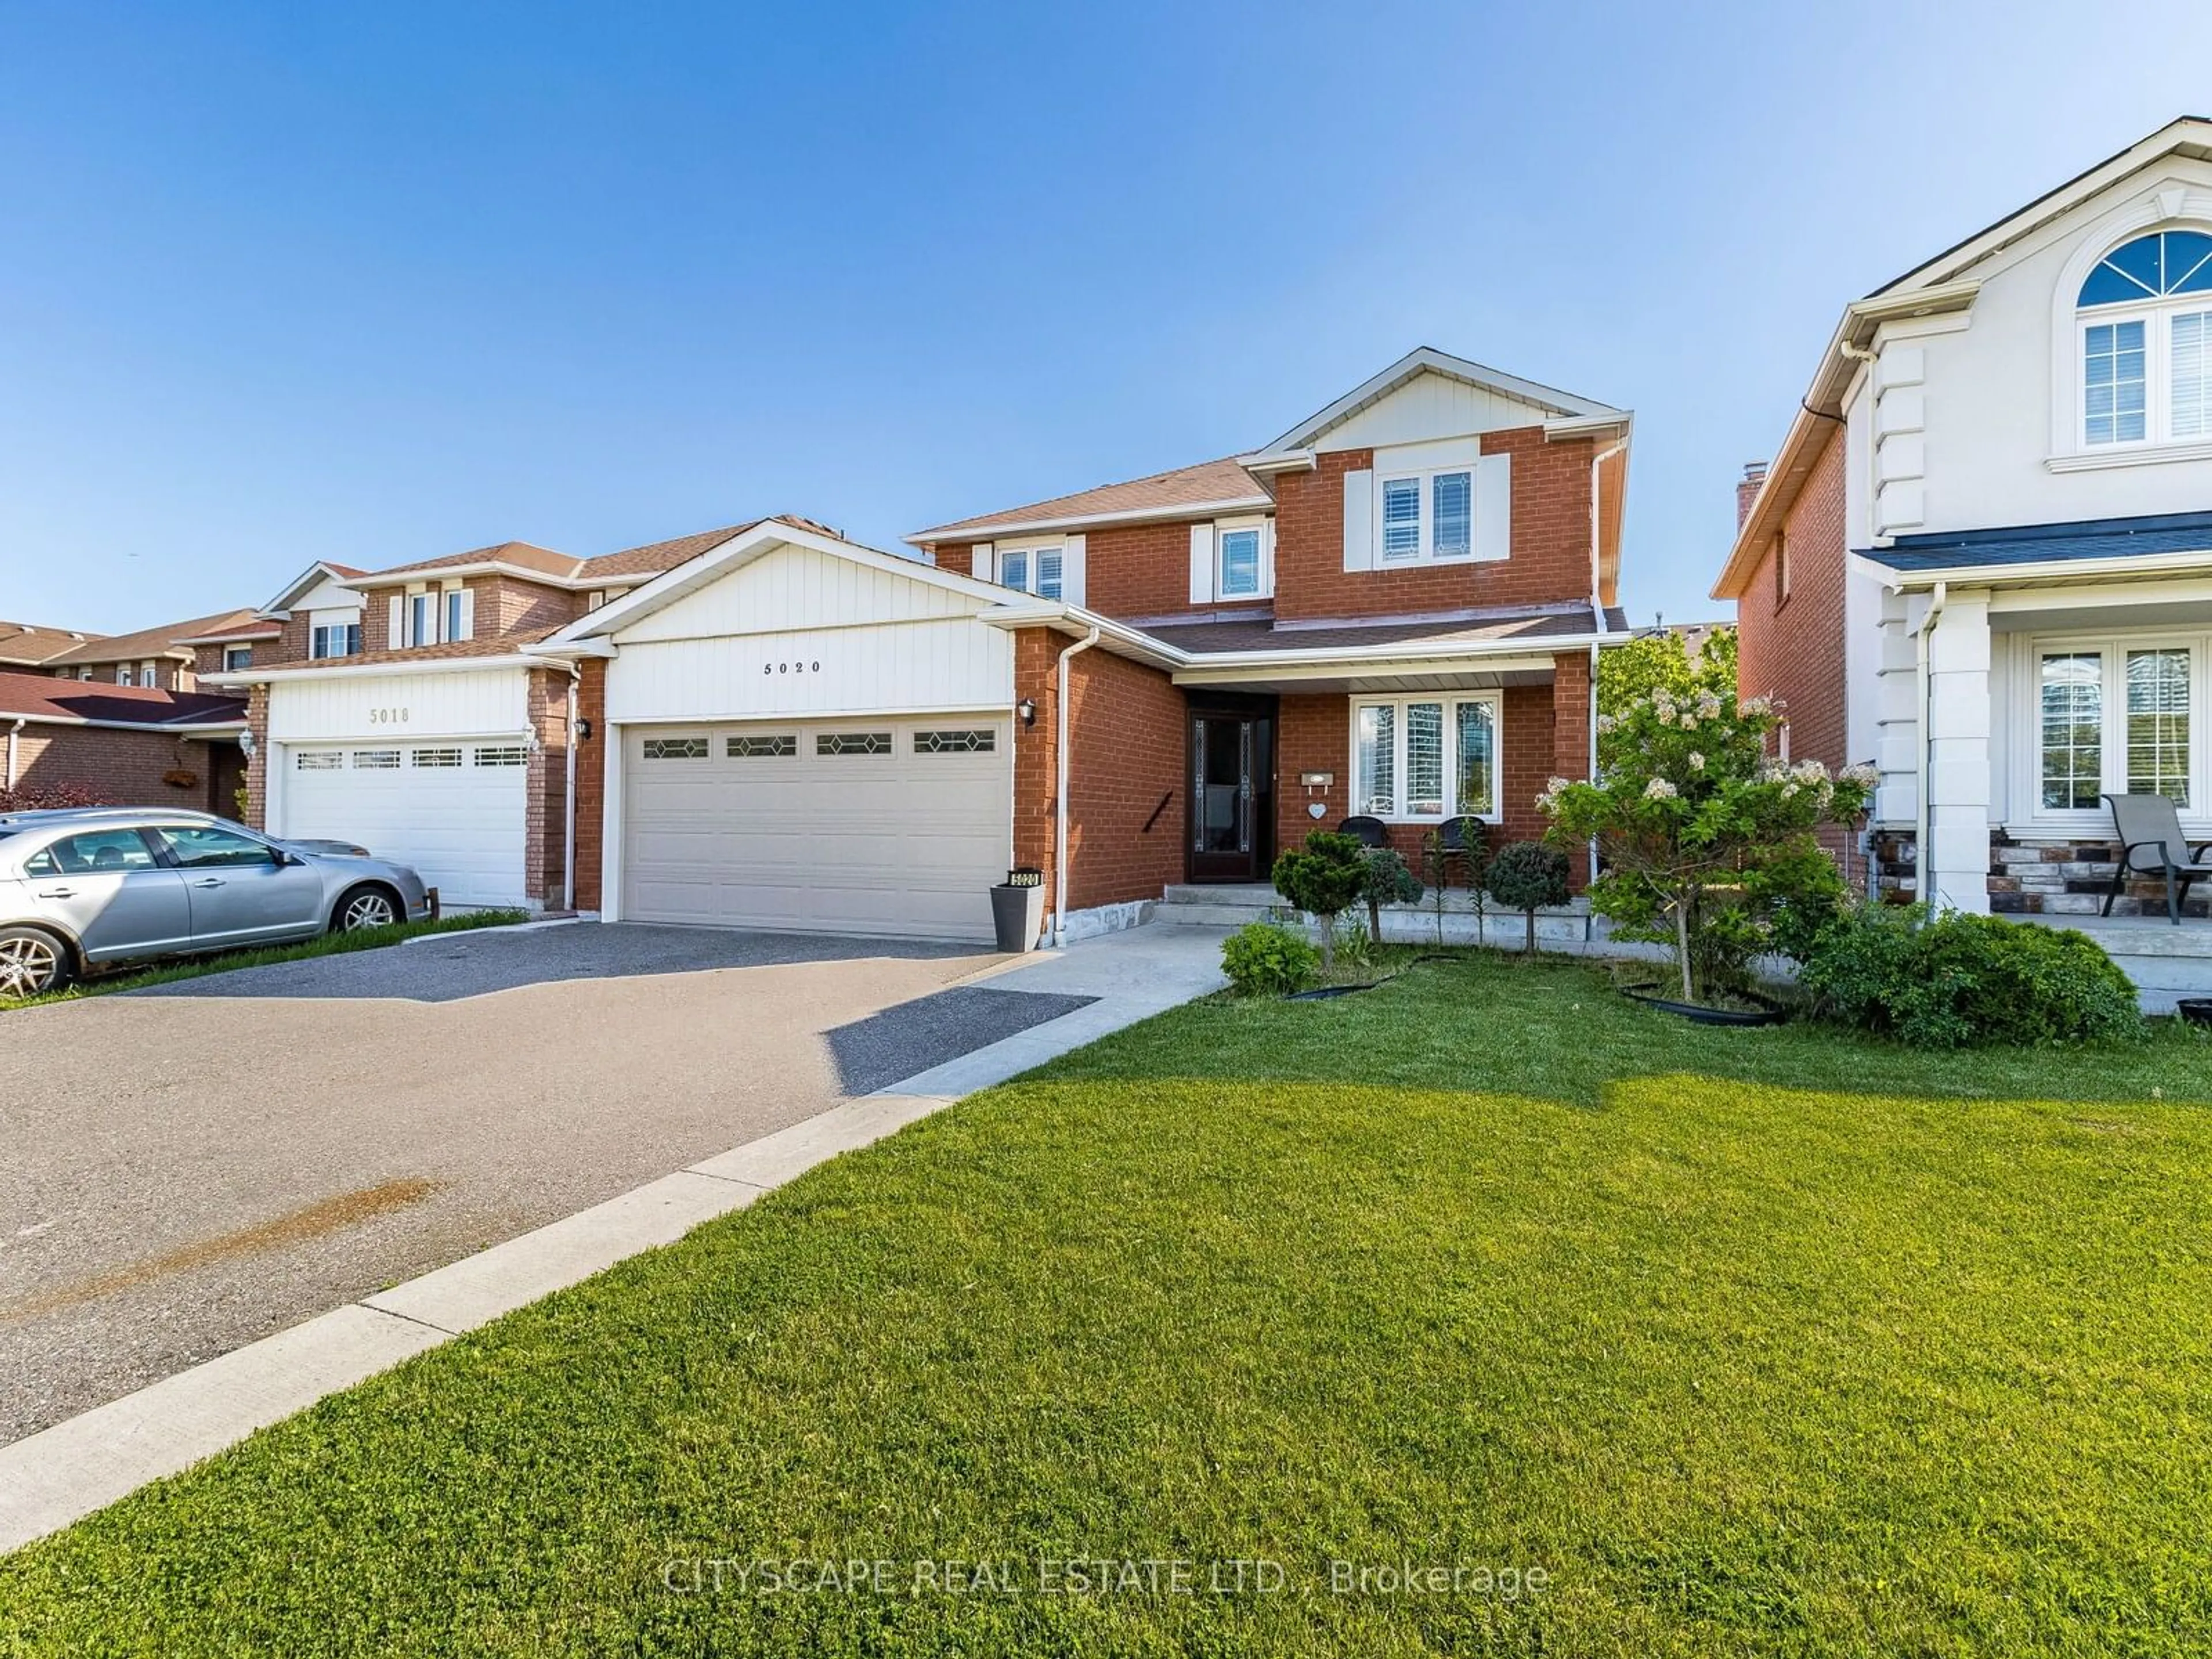 Frontside or backside of a home for 5020 Fairwind Dr, Mississauga Ontario L5R 3P8